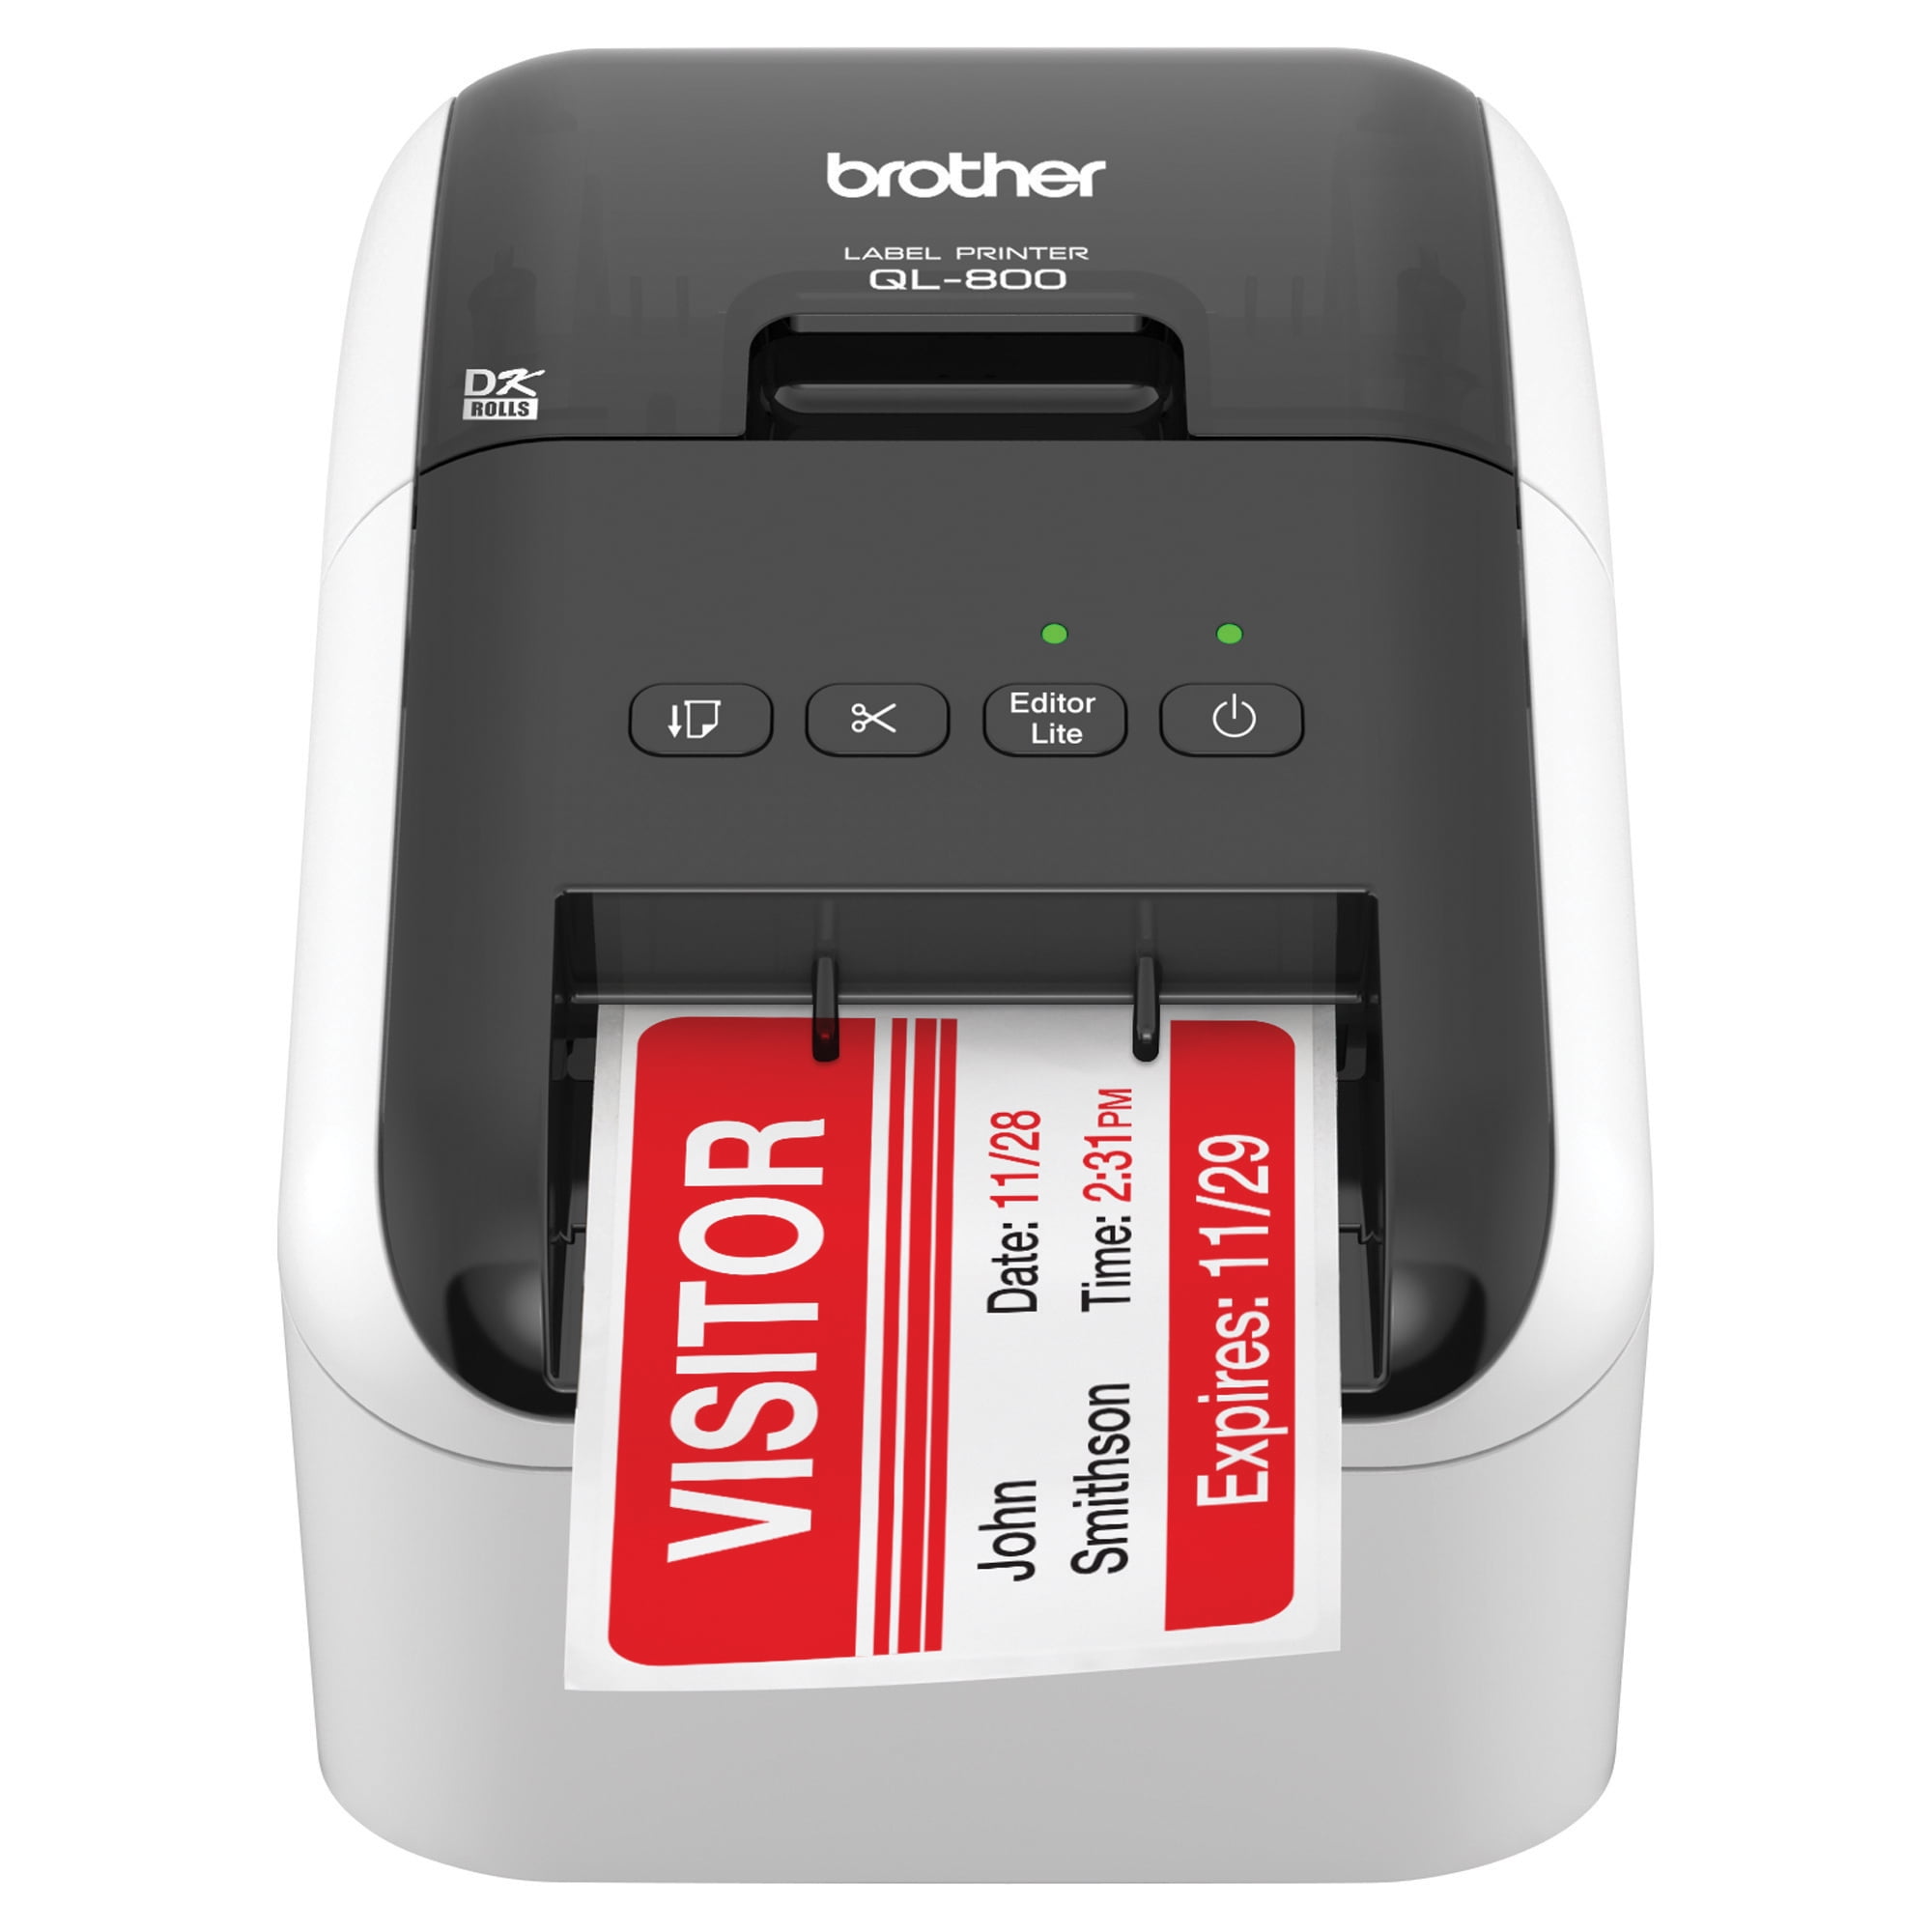 Brother QL-800 High-Speed Professional Label & Red - Walmart.com